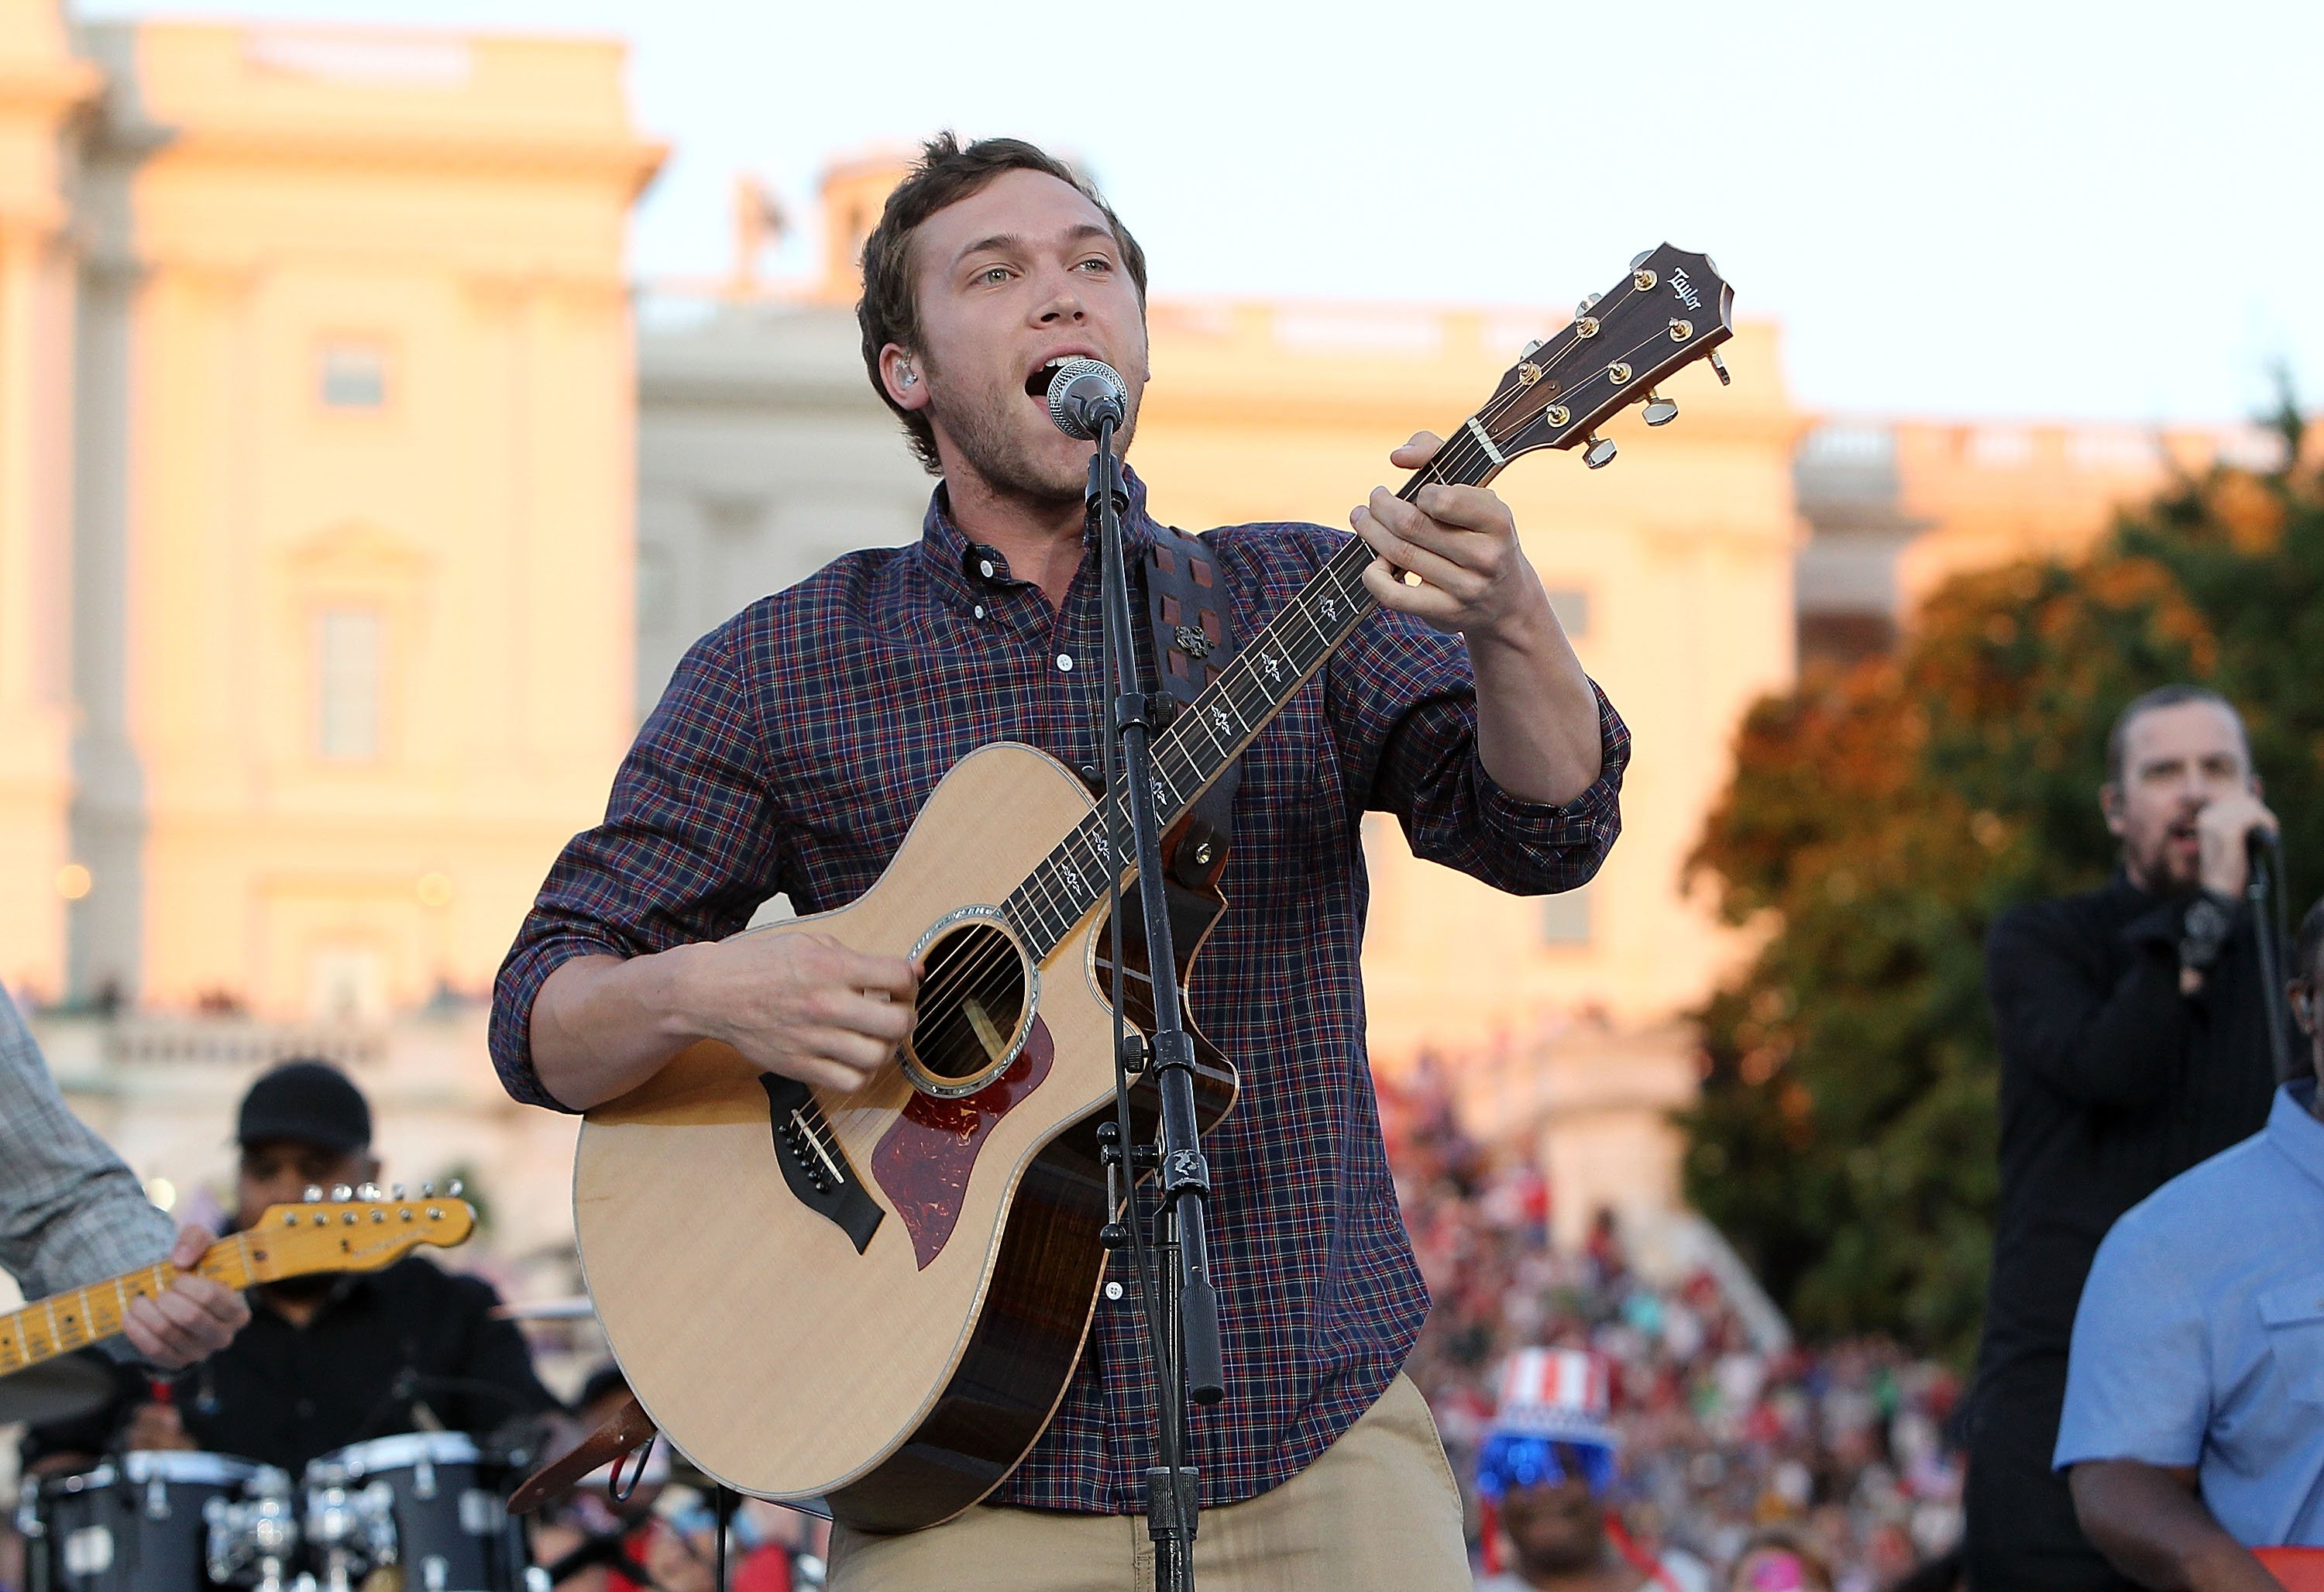 Winner On 'American Idol' Phillip Phillips' Family Selling Their Pawn Shop | Celebrity ...